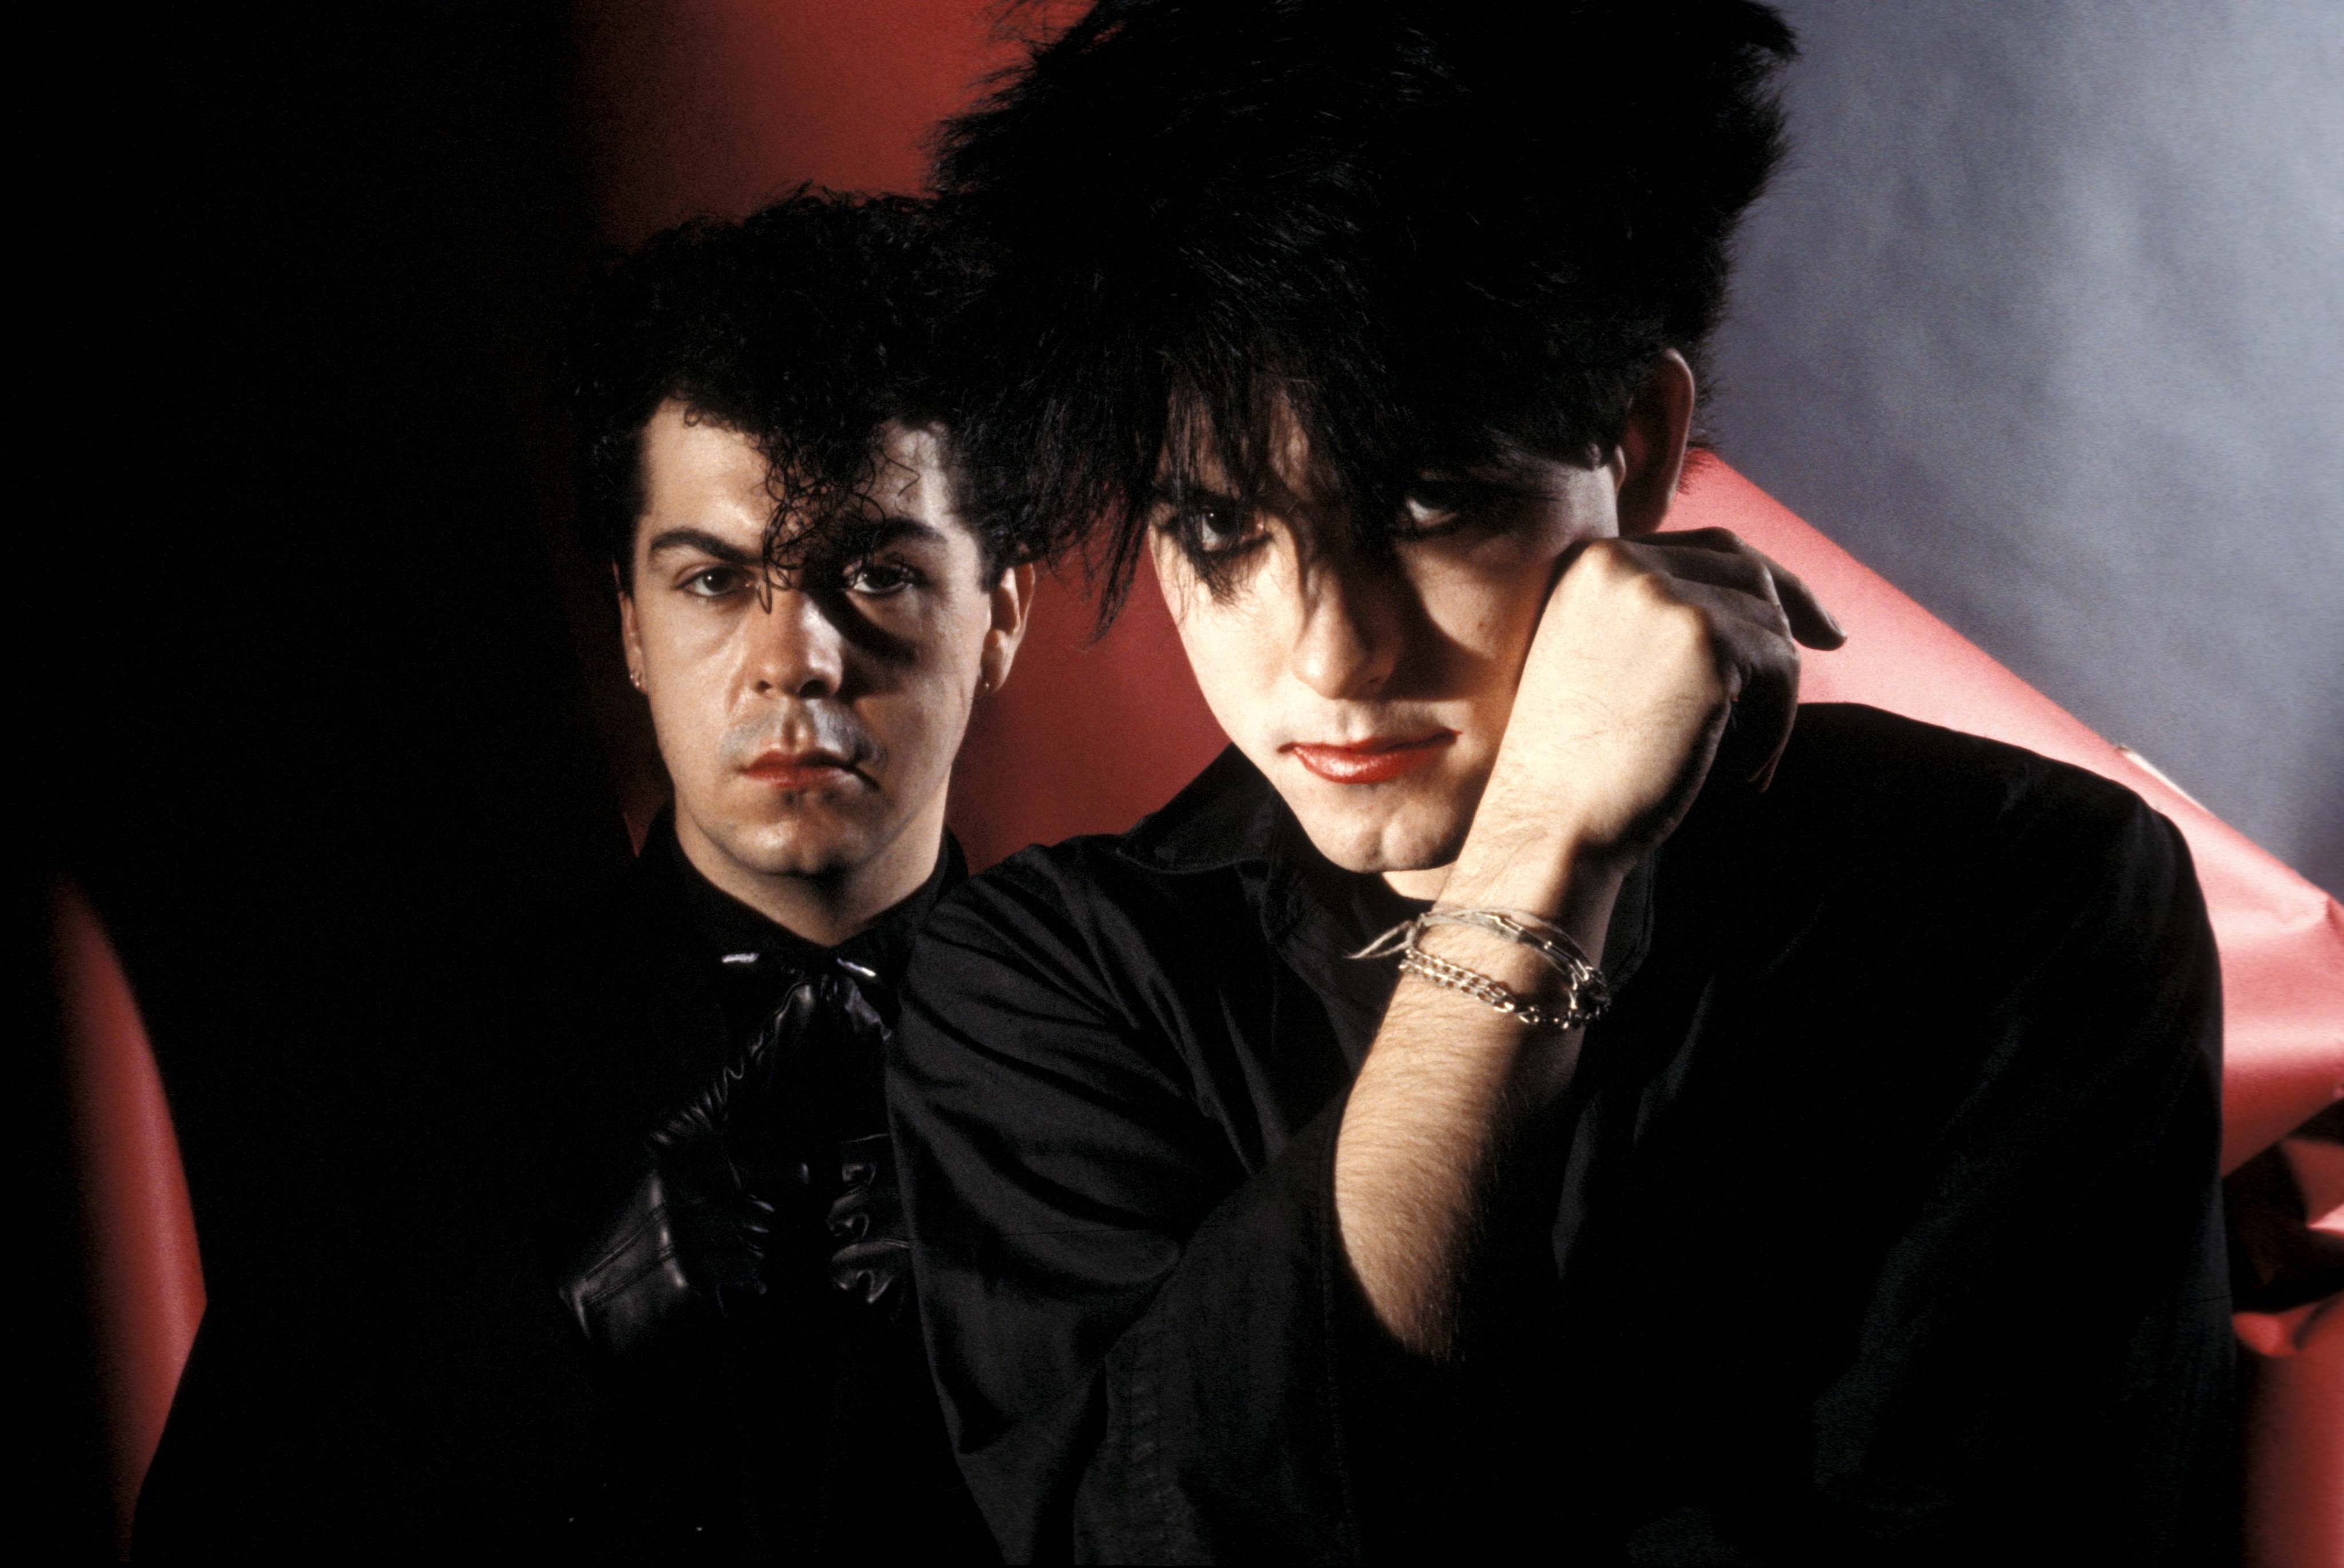 The Cure's Lol Tolhurst: 'Goth is about being in love with the